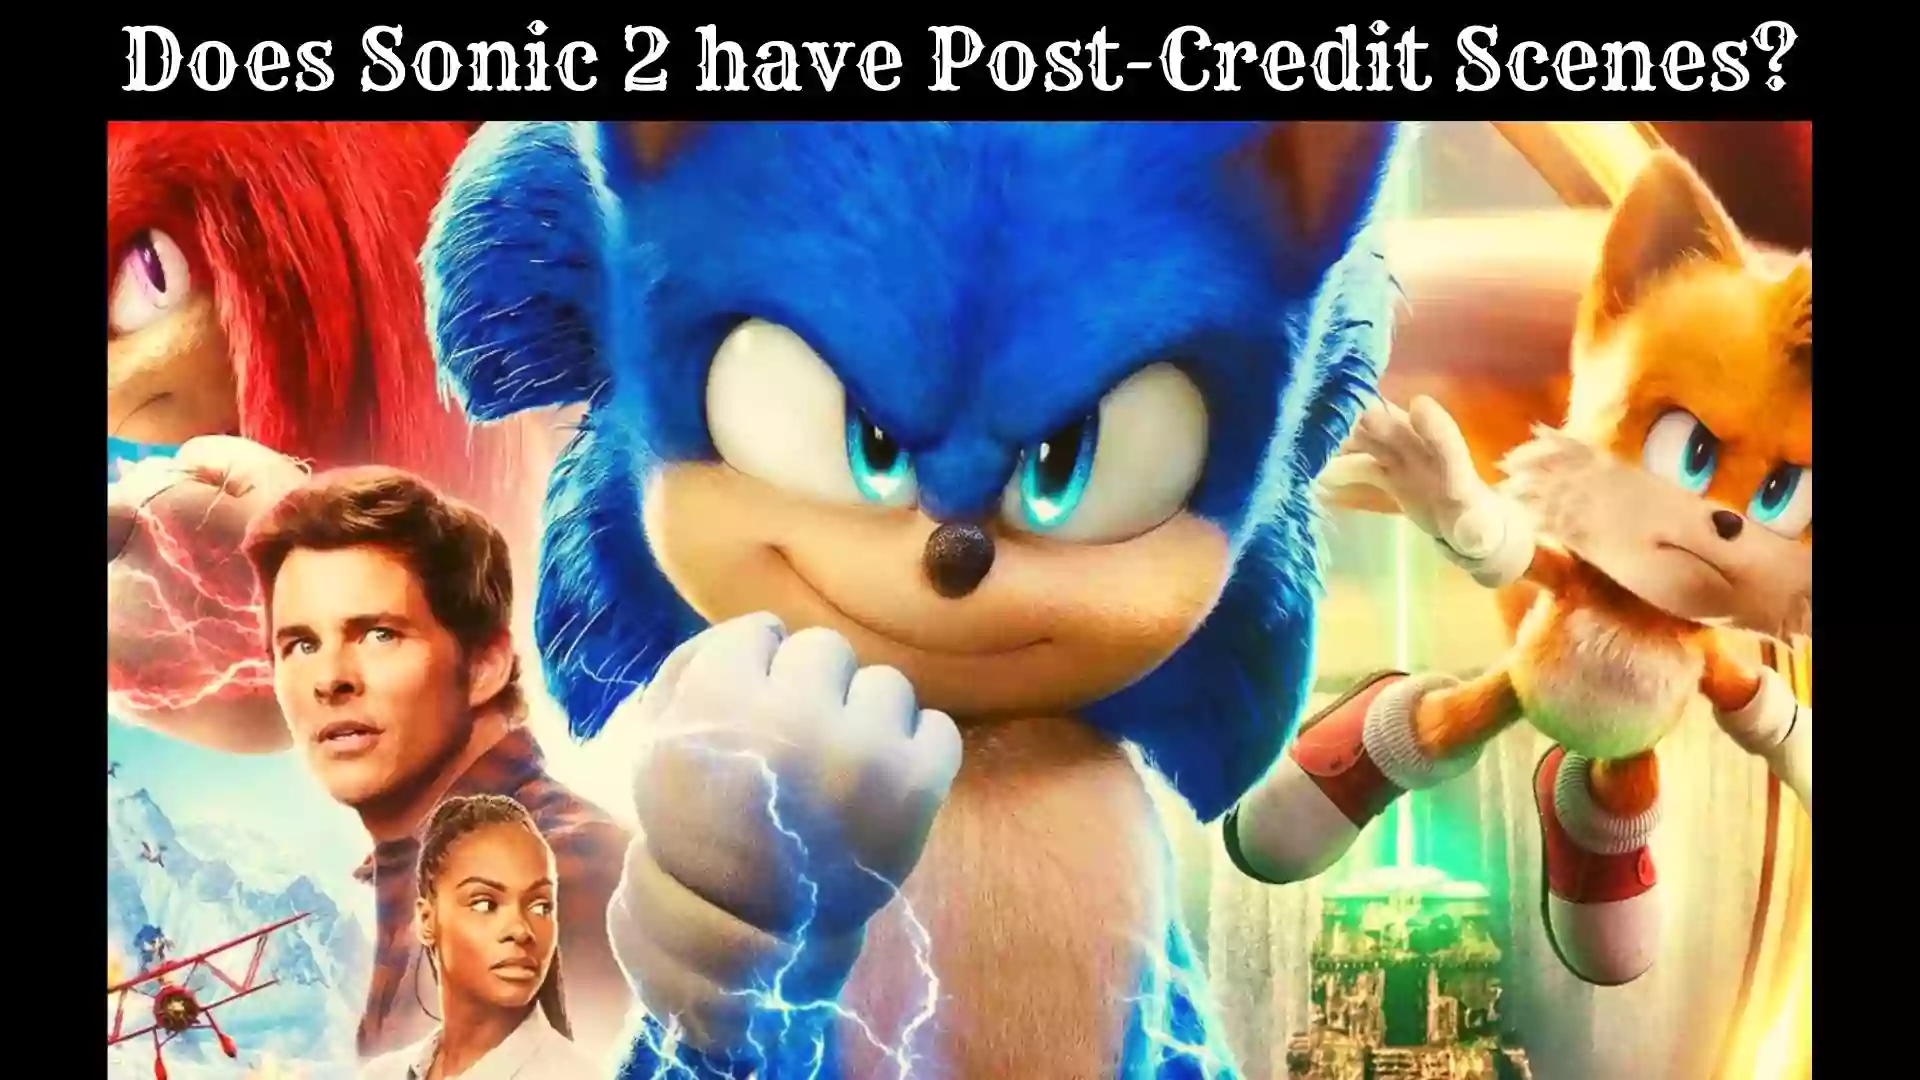 Does Sonic 2 have Post-Credit Scenes